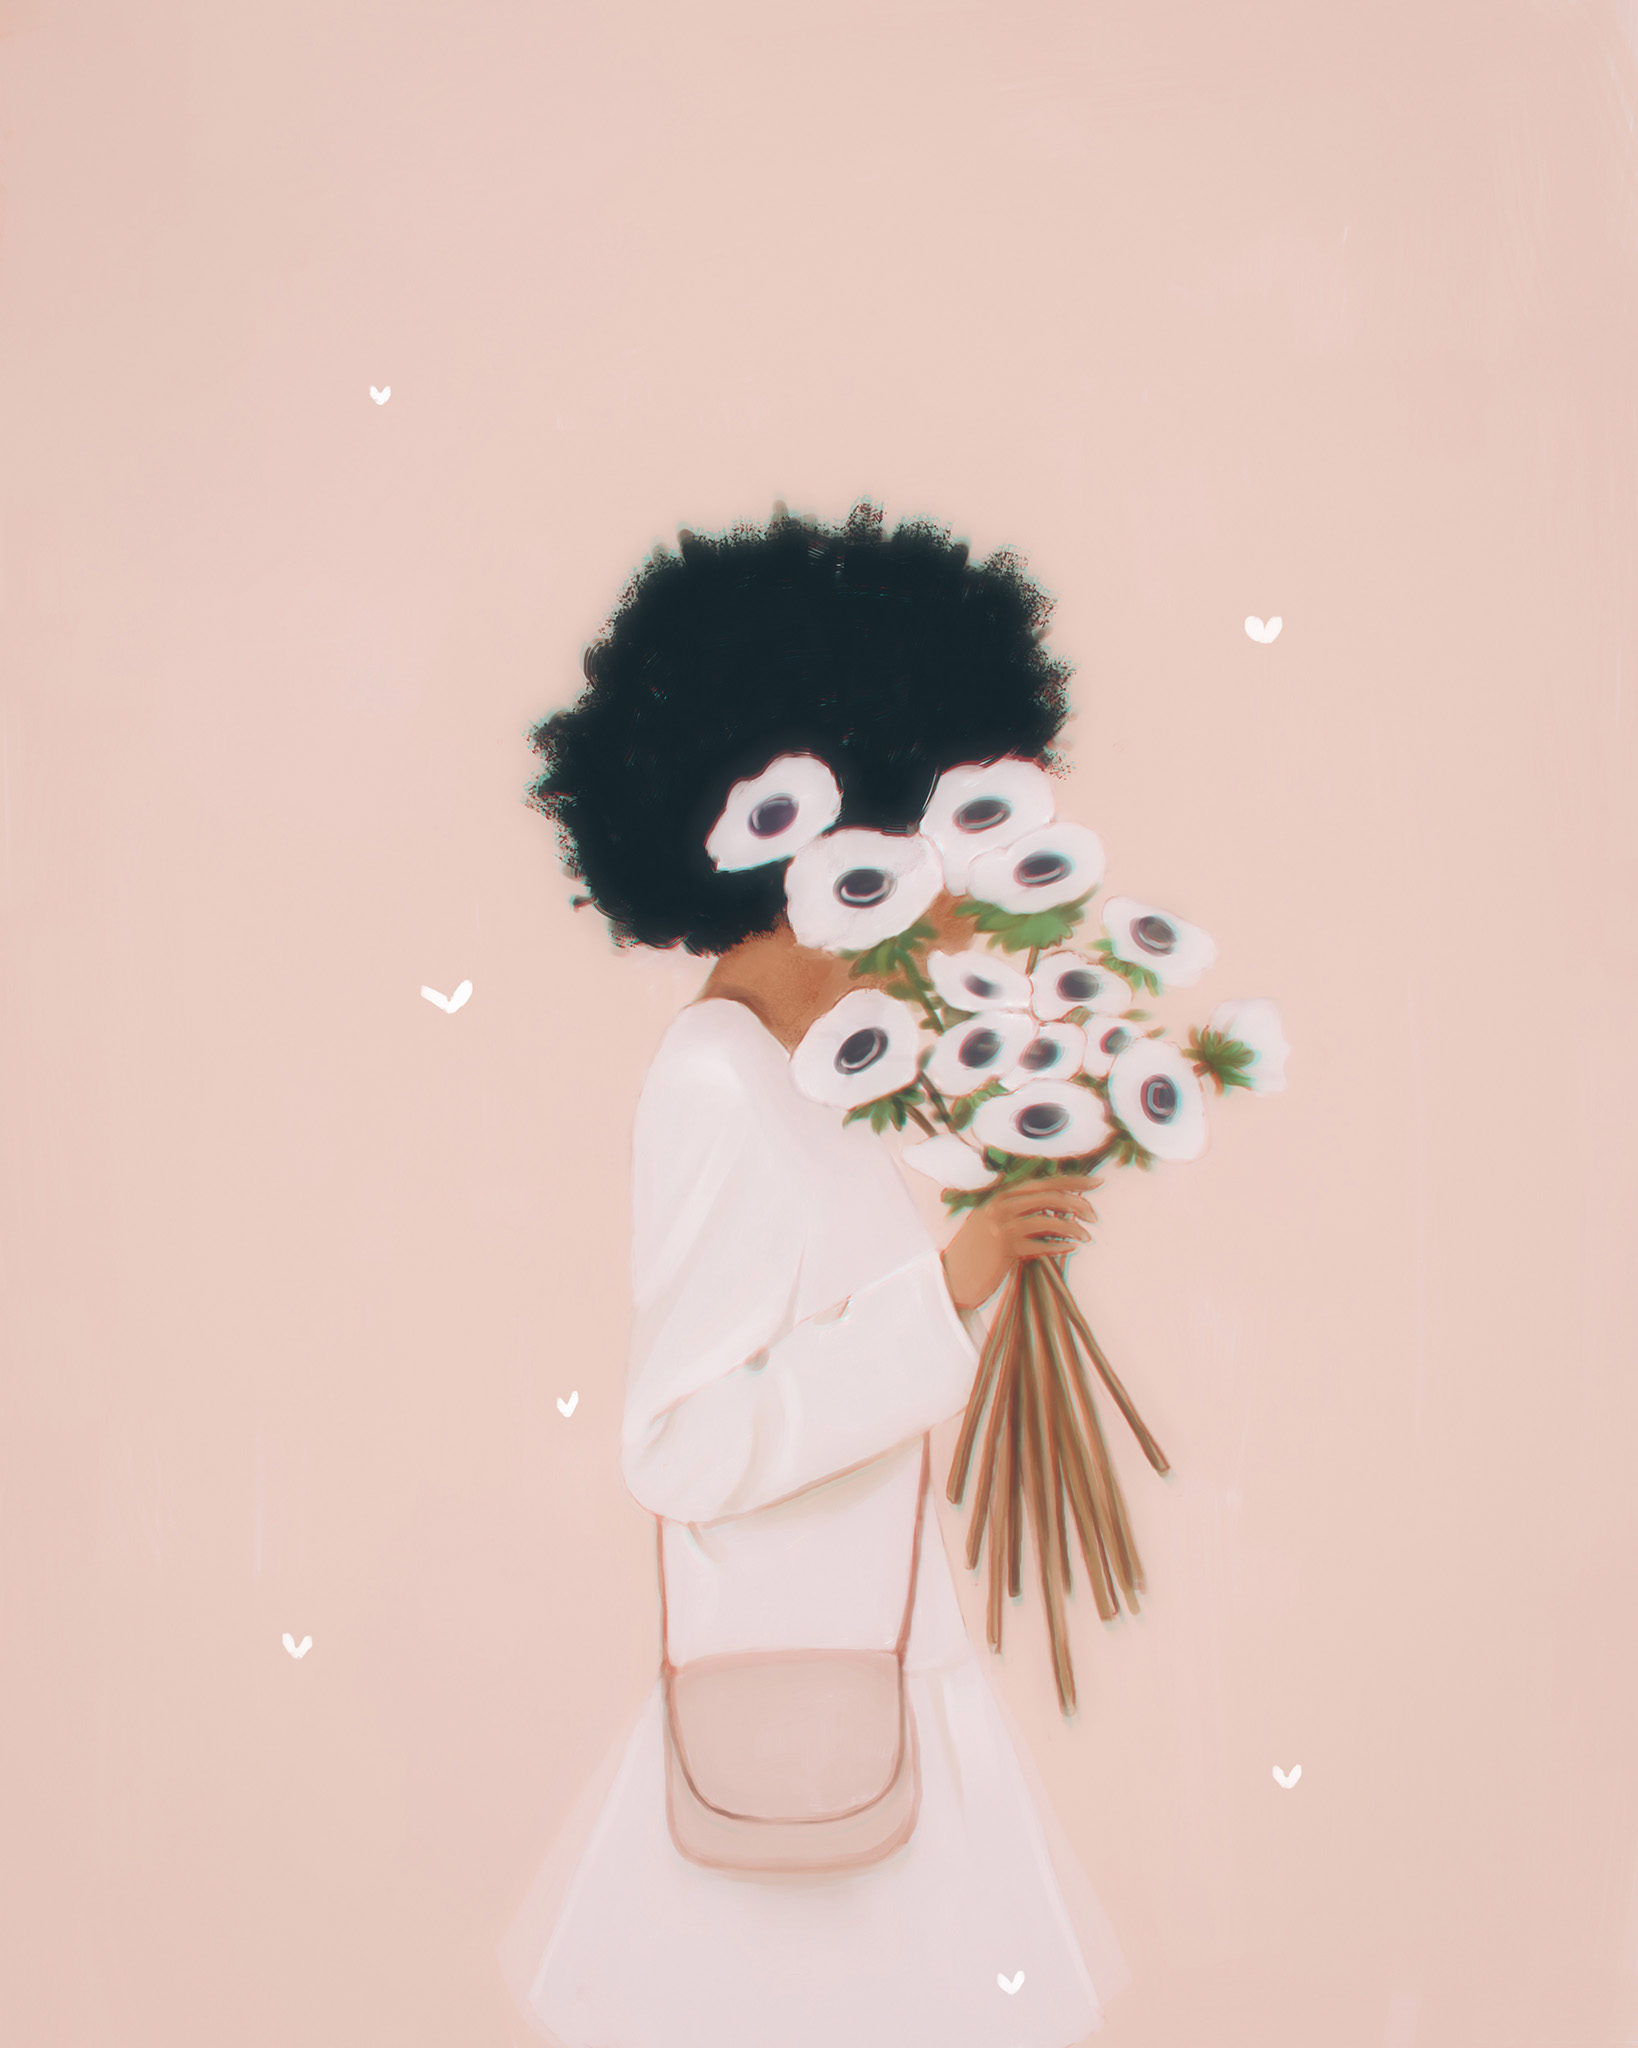 Flowers For Her